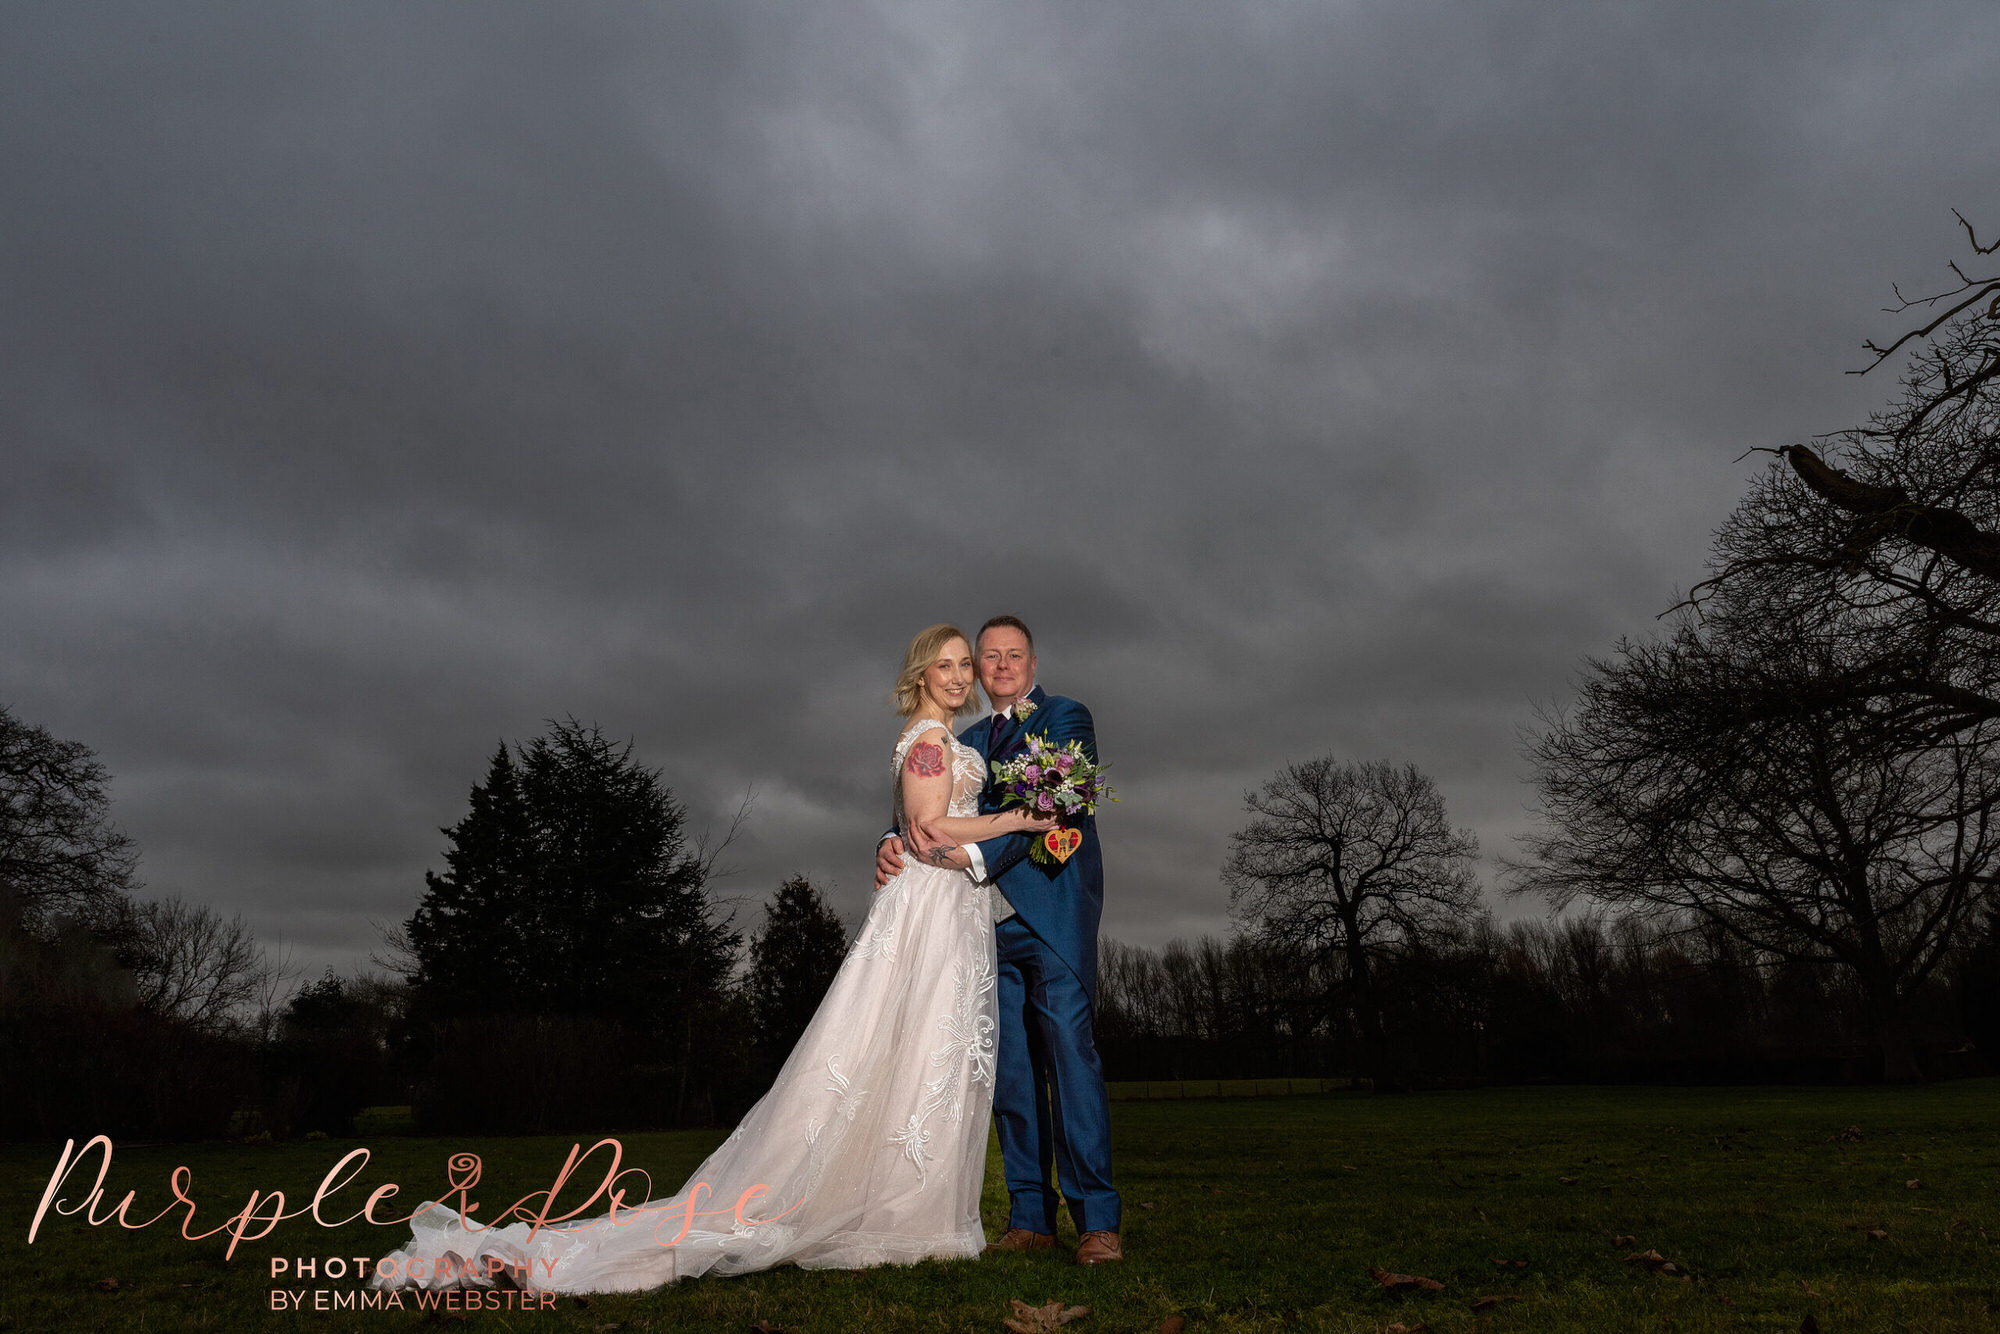 Bride and groom in front of a stormy sky